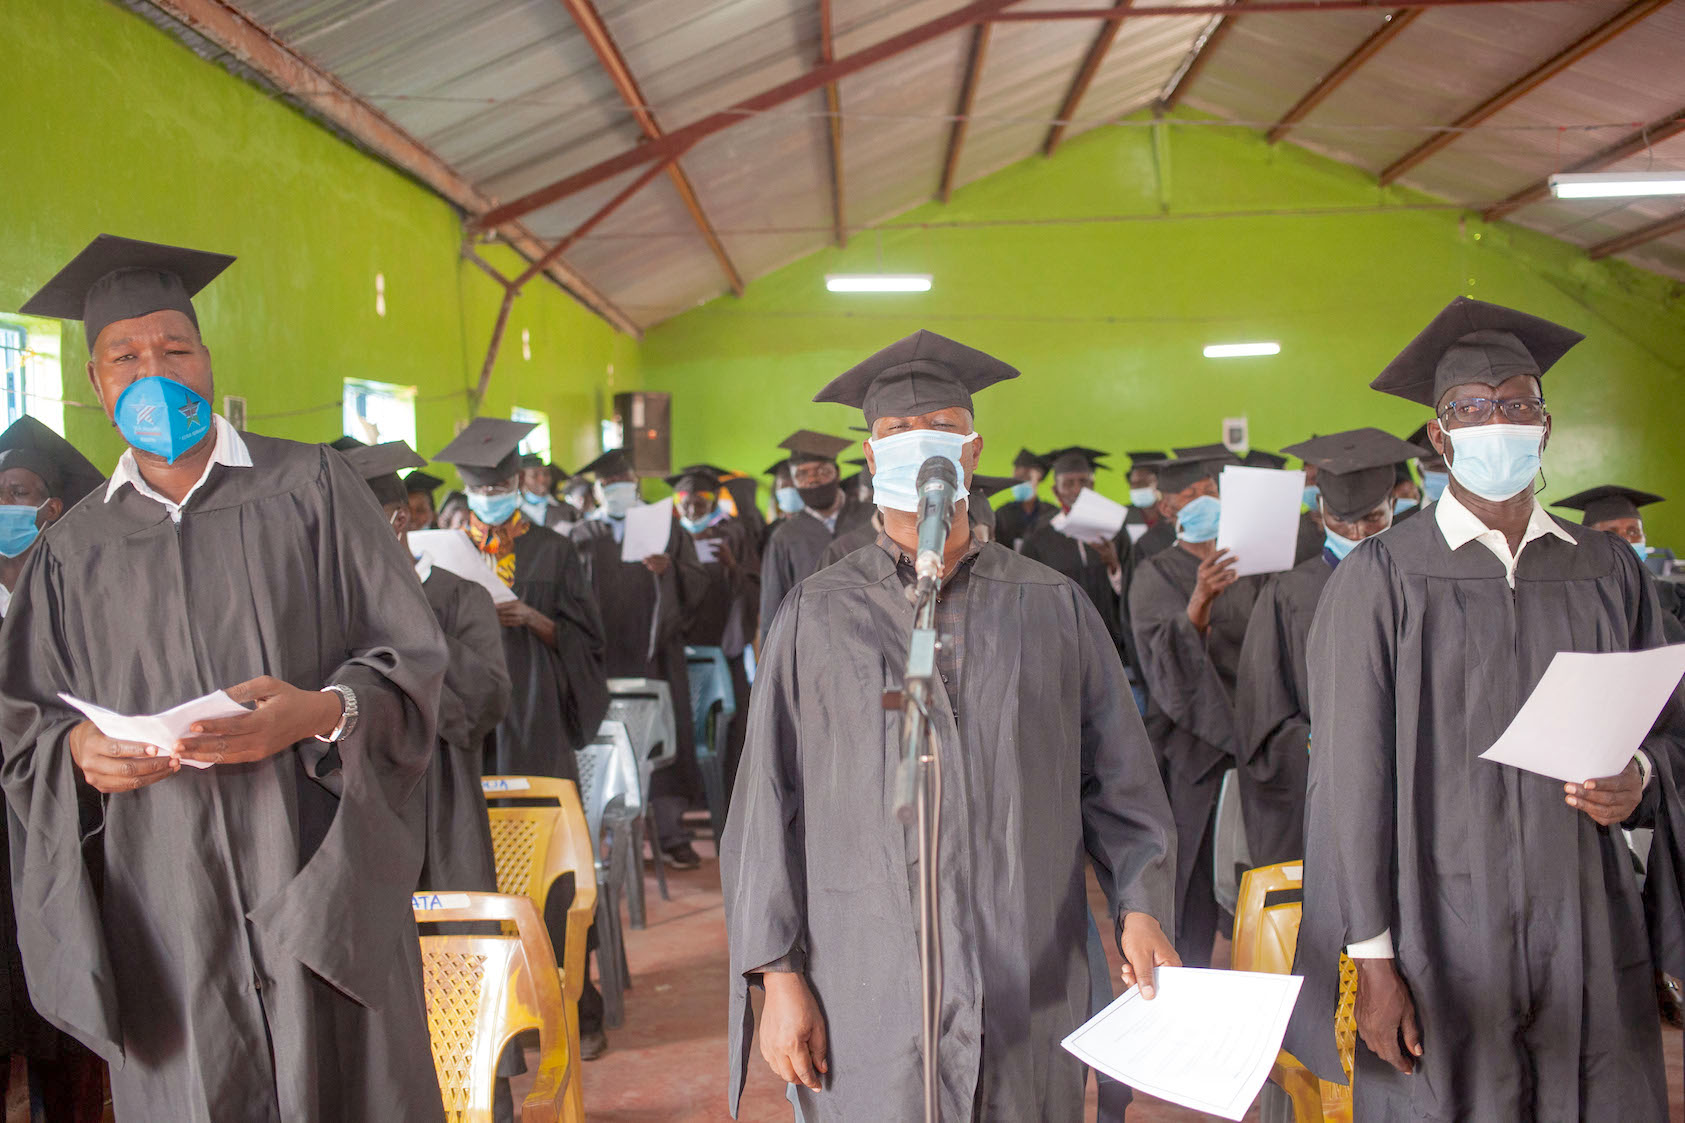 DUring the graduation ceremony, the trained faith leaders made a commitment to use the knowldge acquired to uplift the lives of children and families in their communities.©World Vision Photo. 